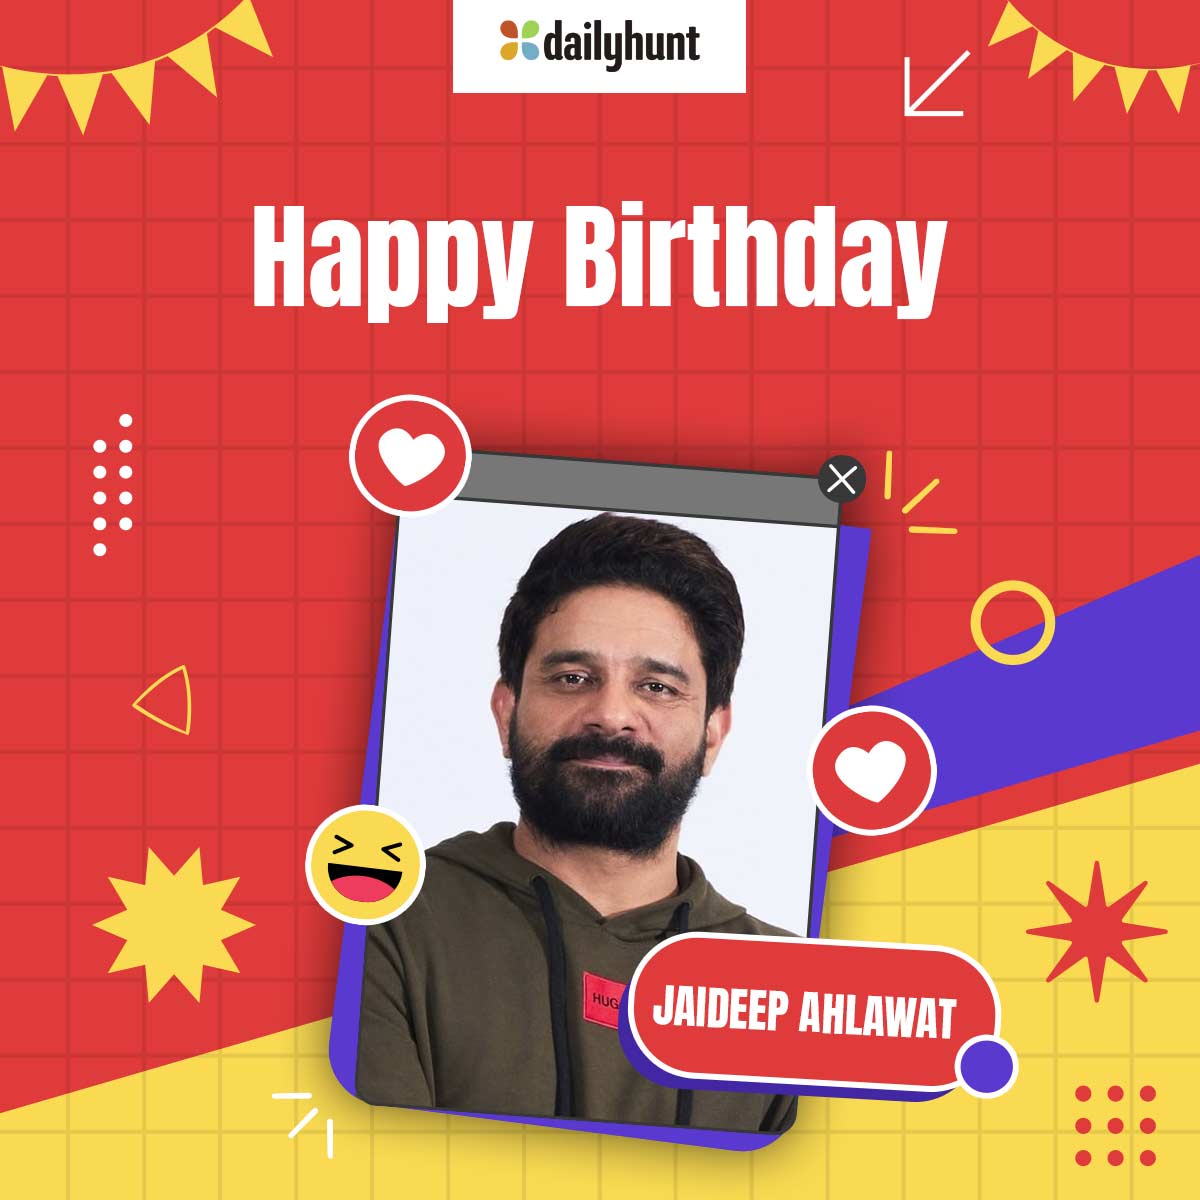 Happy birthday! Remember that the best is yet to come. 
പിറന്നാൾആശംസകൾ...🎉🎁🎂✨
#HappyBirthday #JaideepAhlawat #HBDJaideepAhlawat #JaideepAhlawatBirthday #Dailyhunt #Birthdnay #HappyBirthdayJaideepAhlawat